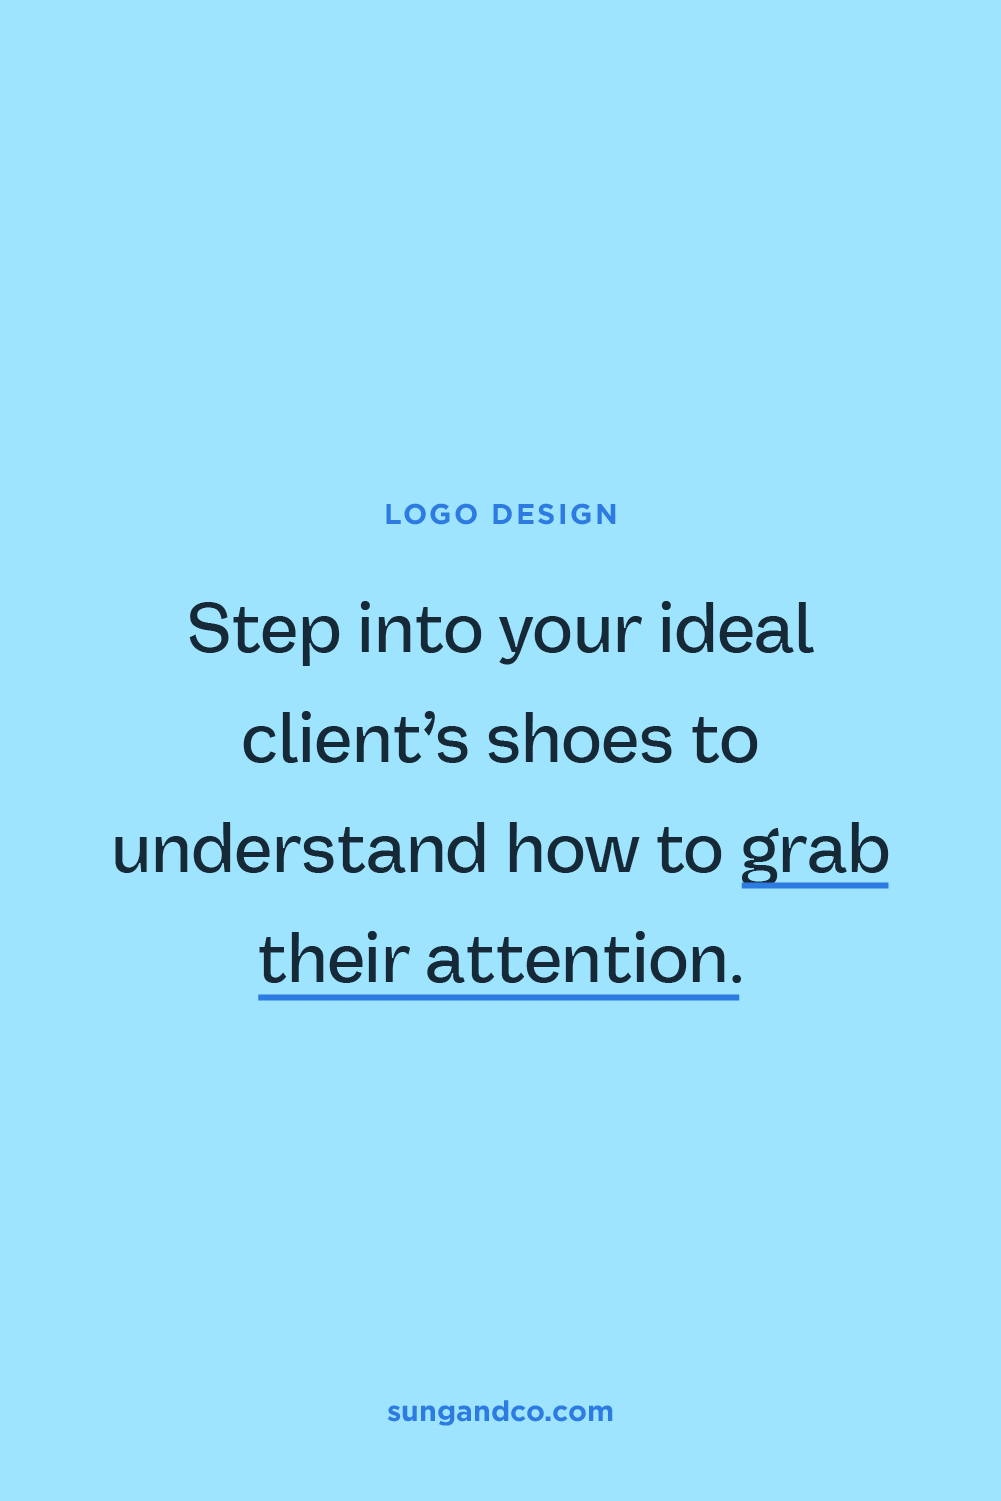 Step into your ideal client's shoes to understand how to grab their attention.